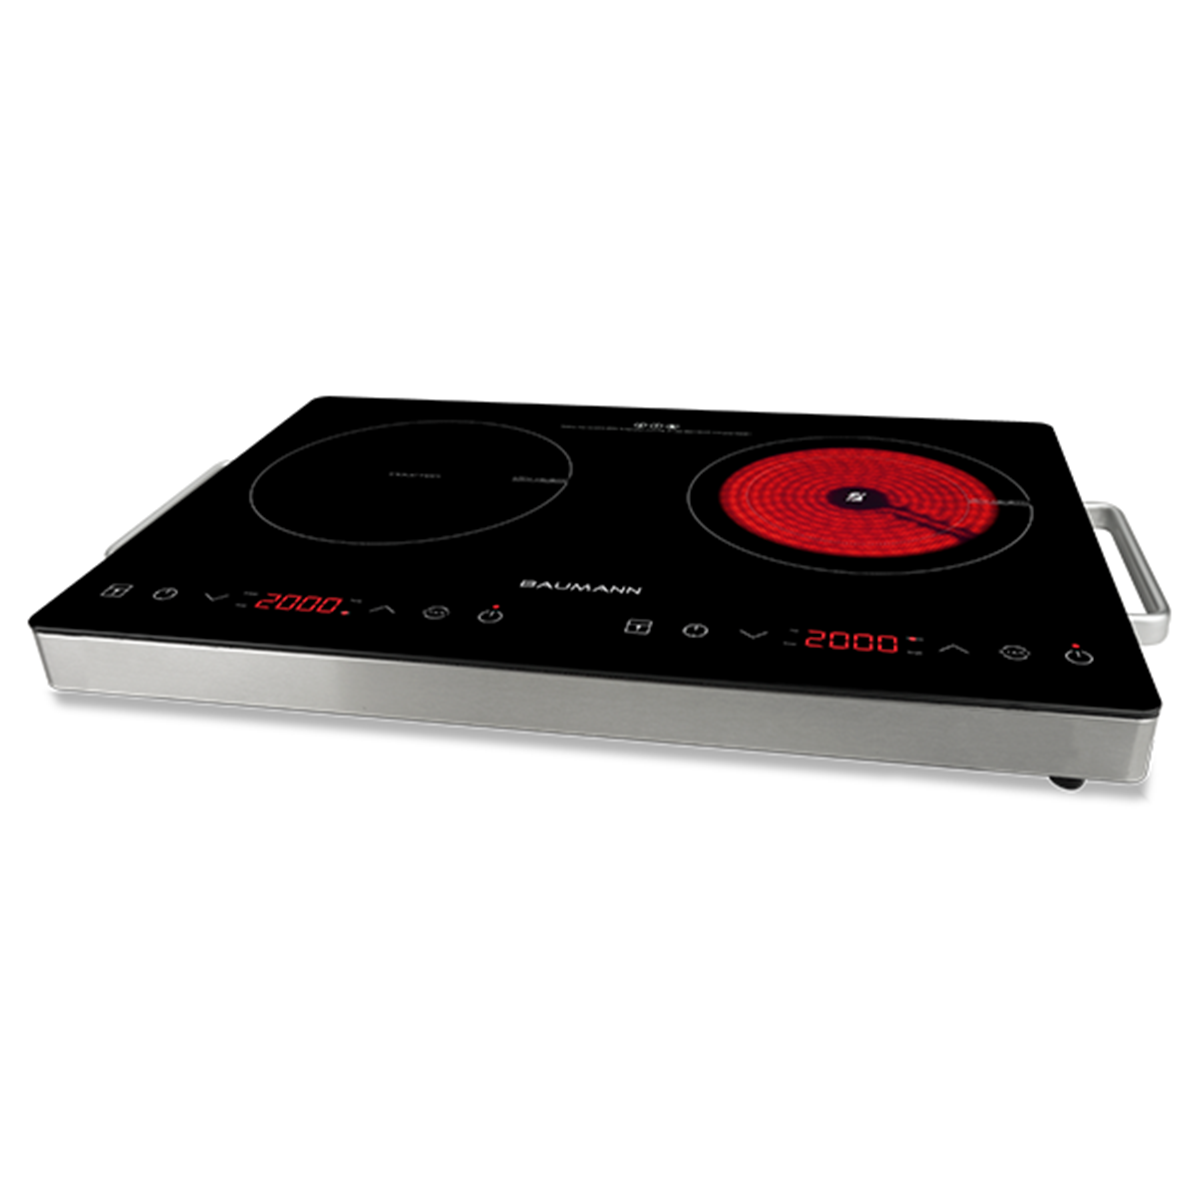 Induction & Infrared Ceramic Cooker